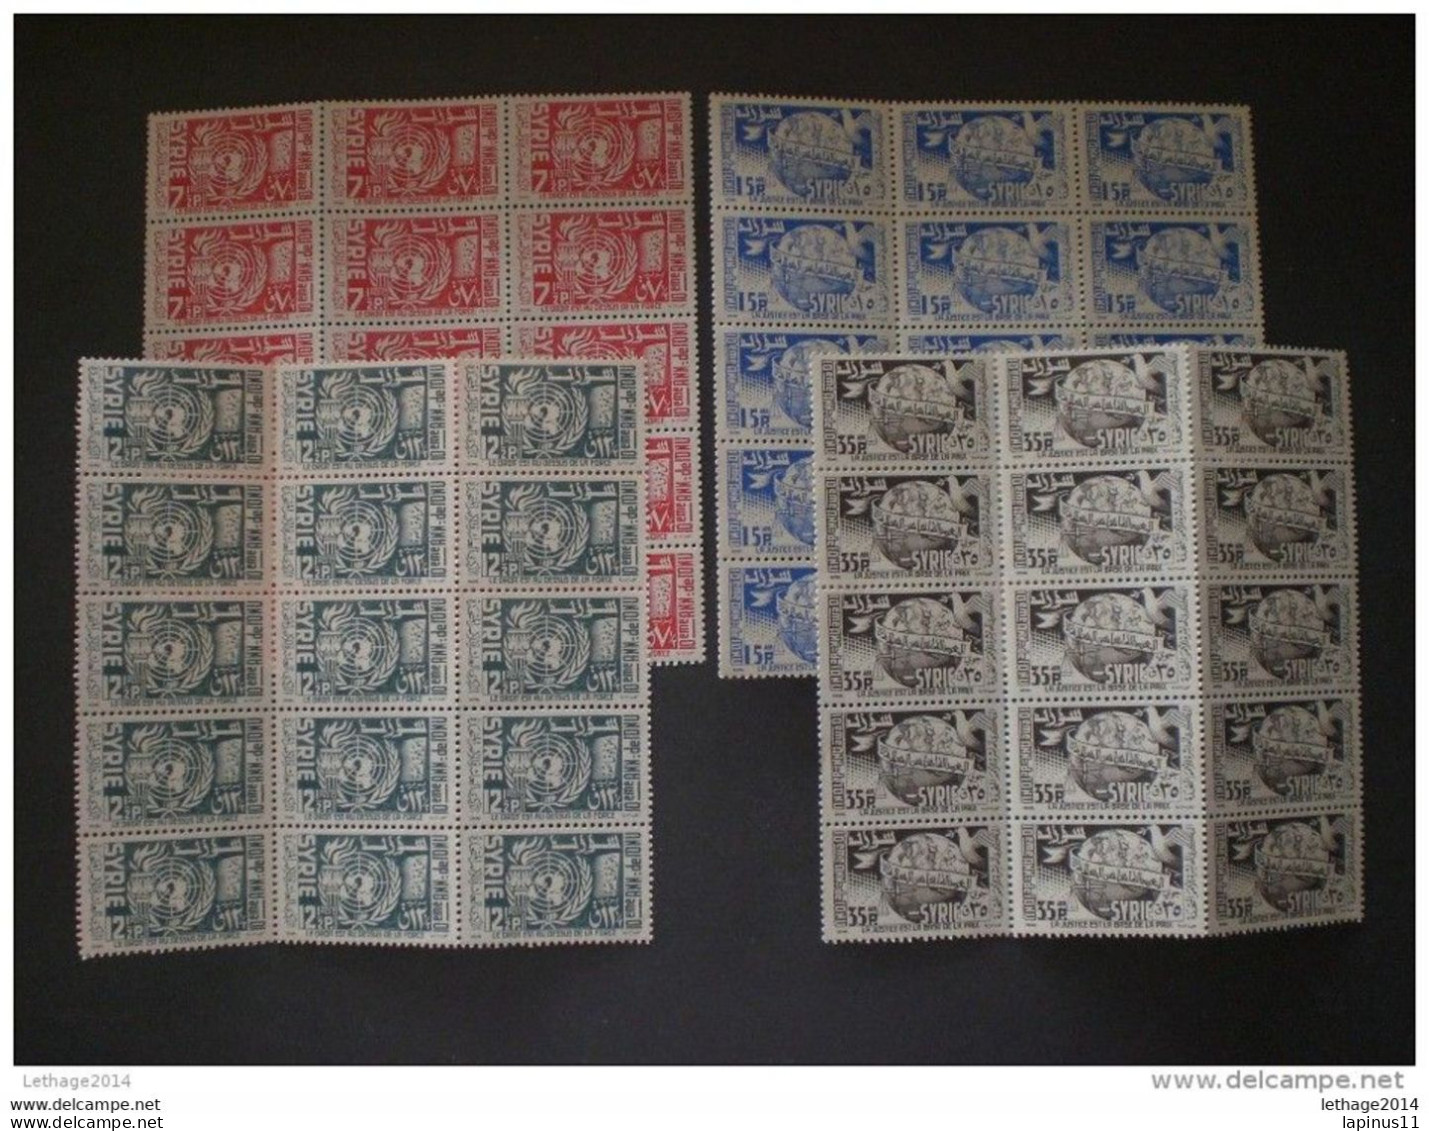 SYRIE سوريا SYRIA 1955 Airmail - The 10th Anniversary Of The United Nations MNH 15 SERY CO - Syrien